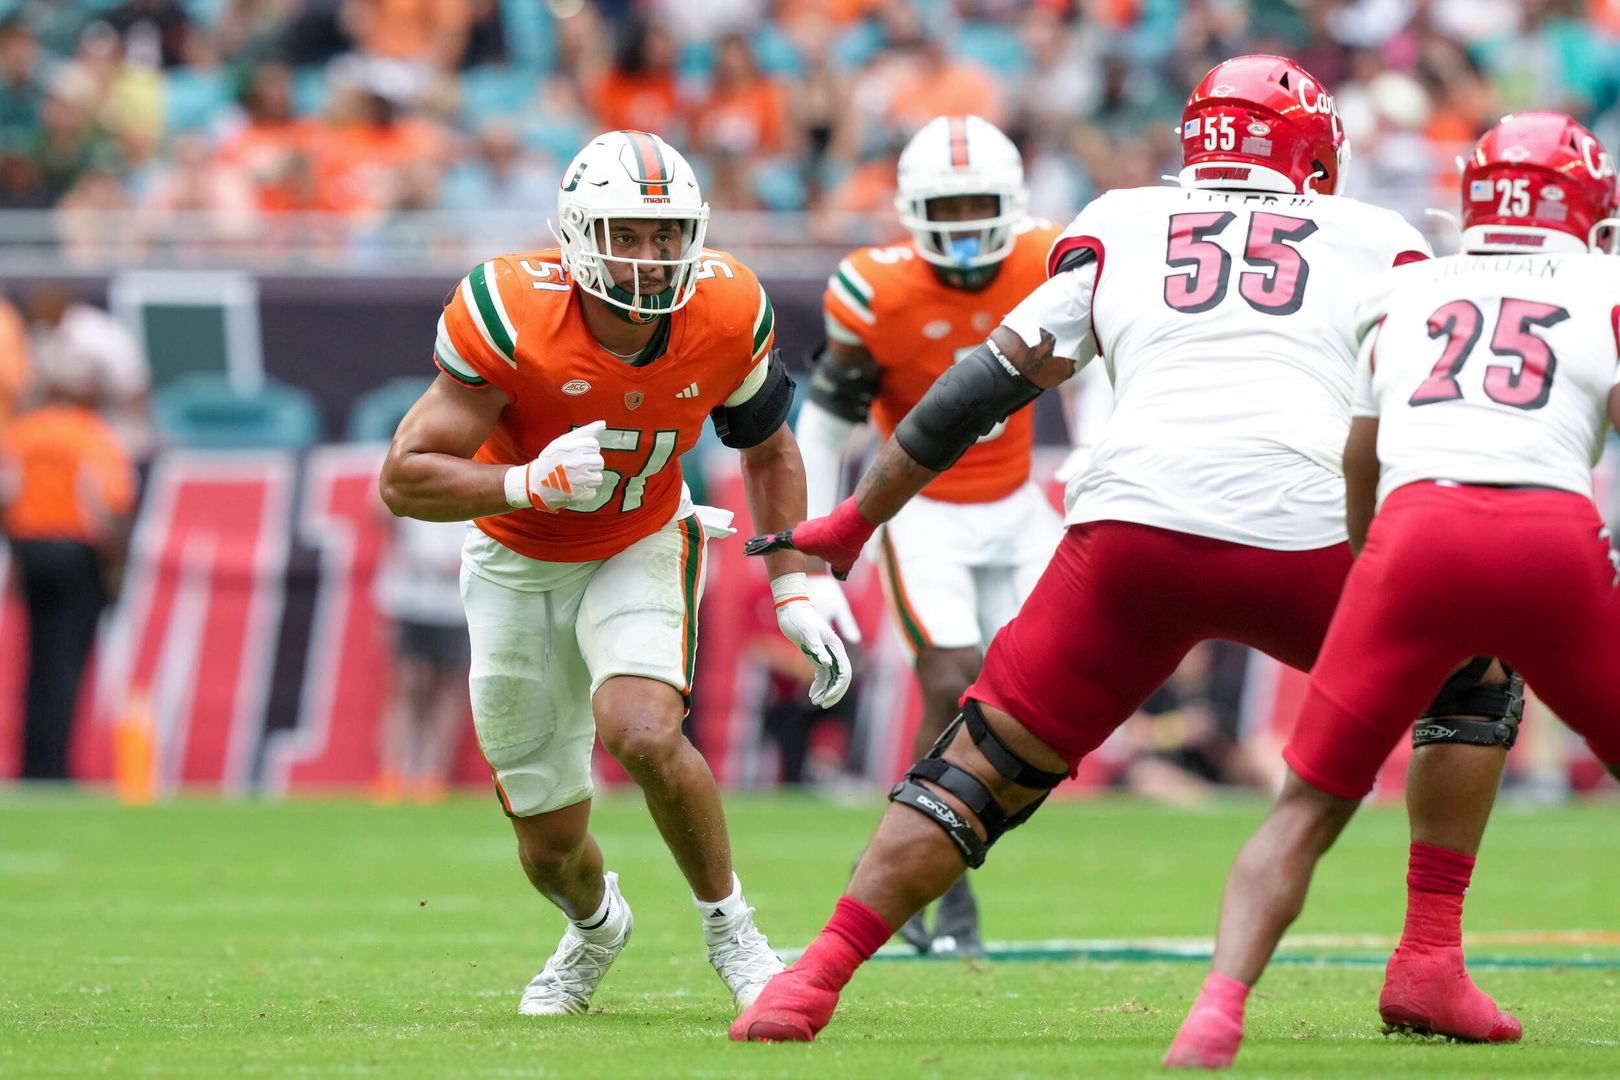 Canes Rewind: A Look Back at the Game Against Louisville